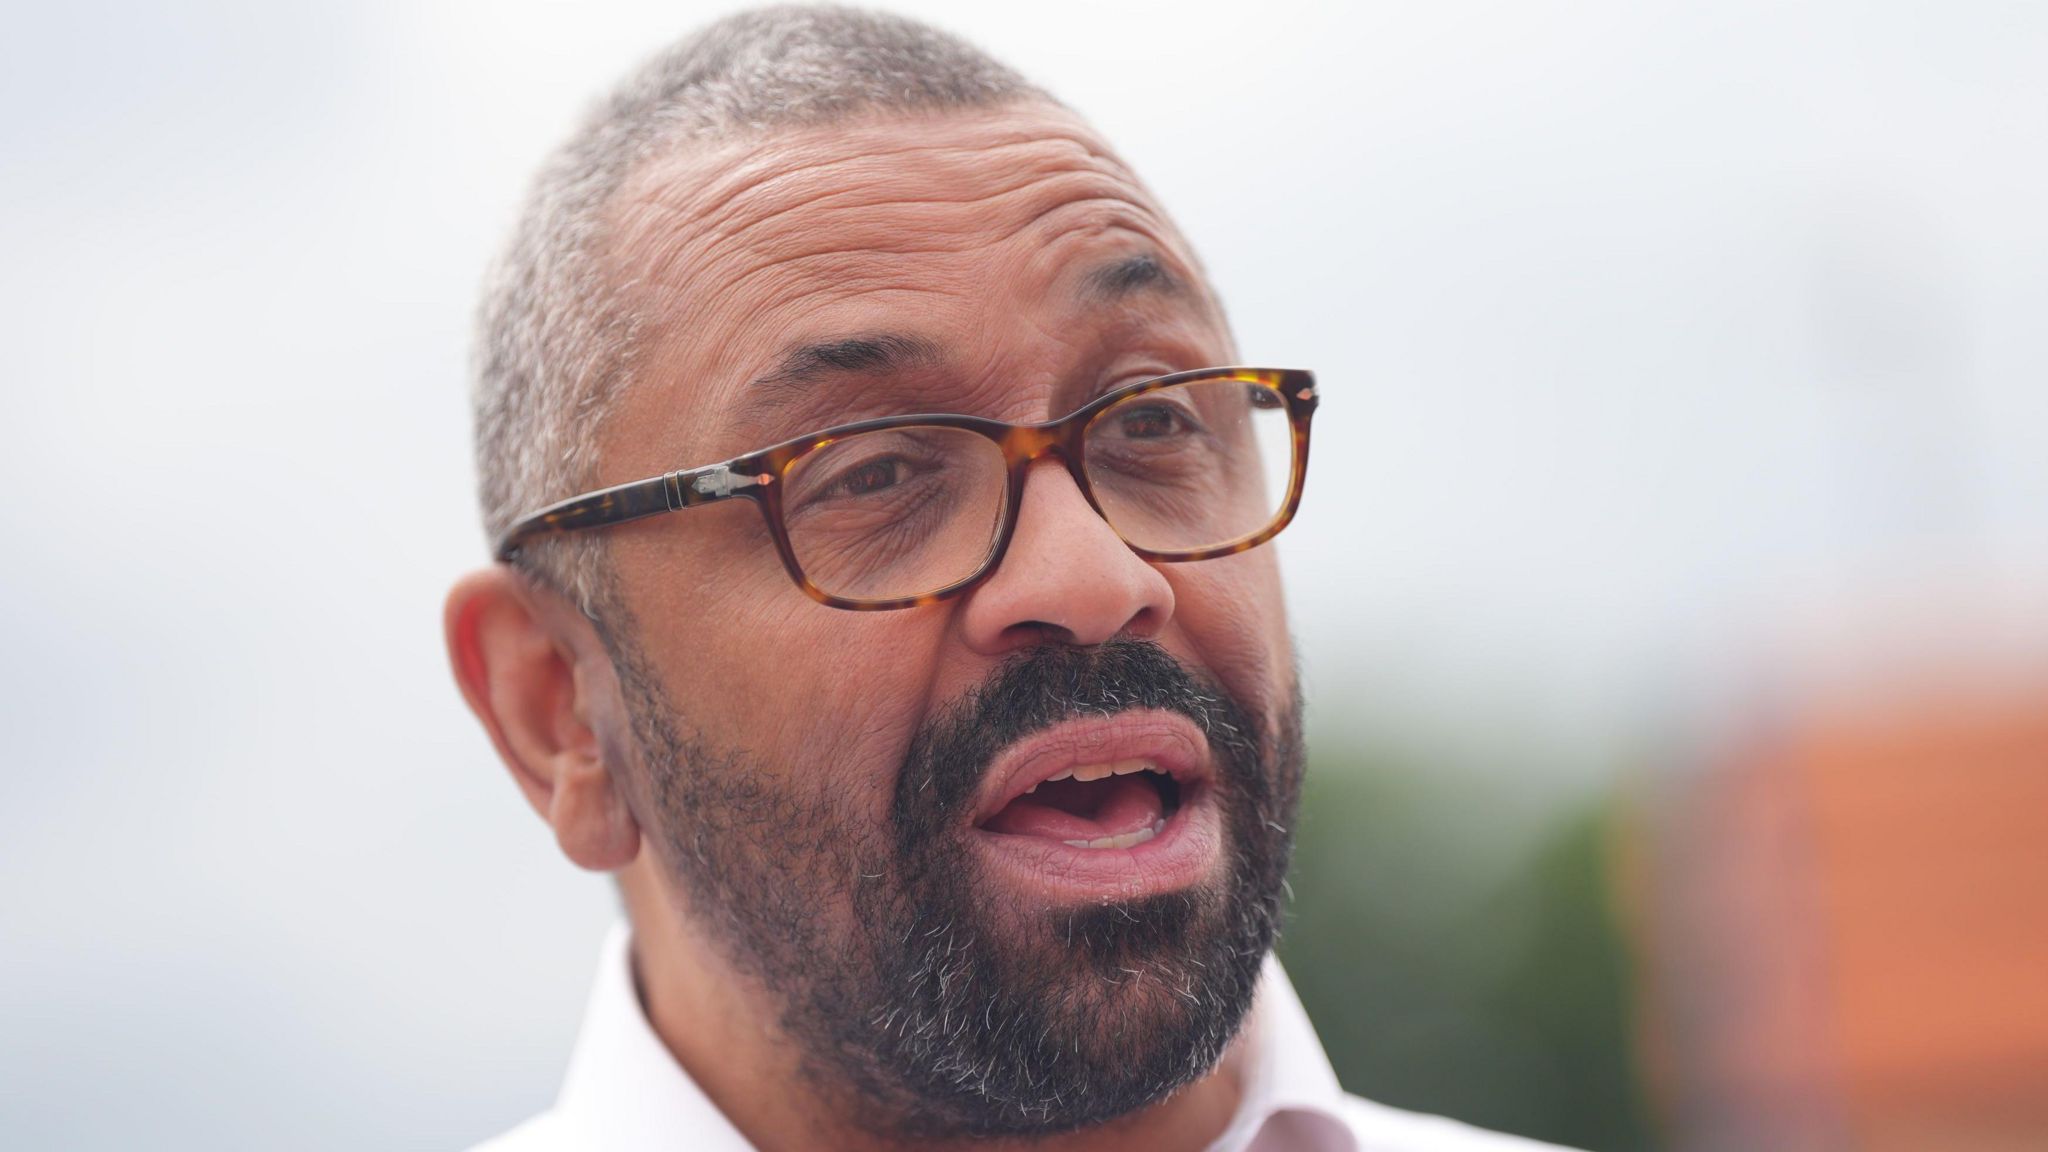 James Cleverly in a shirt and glasses